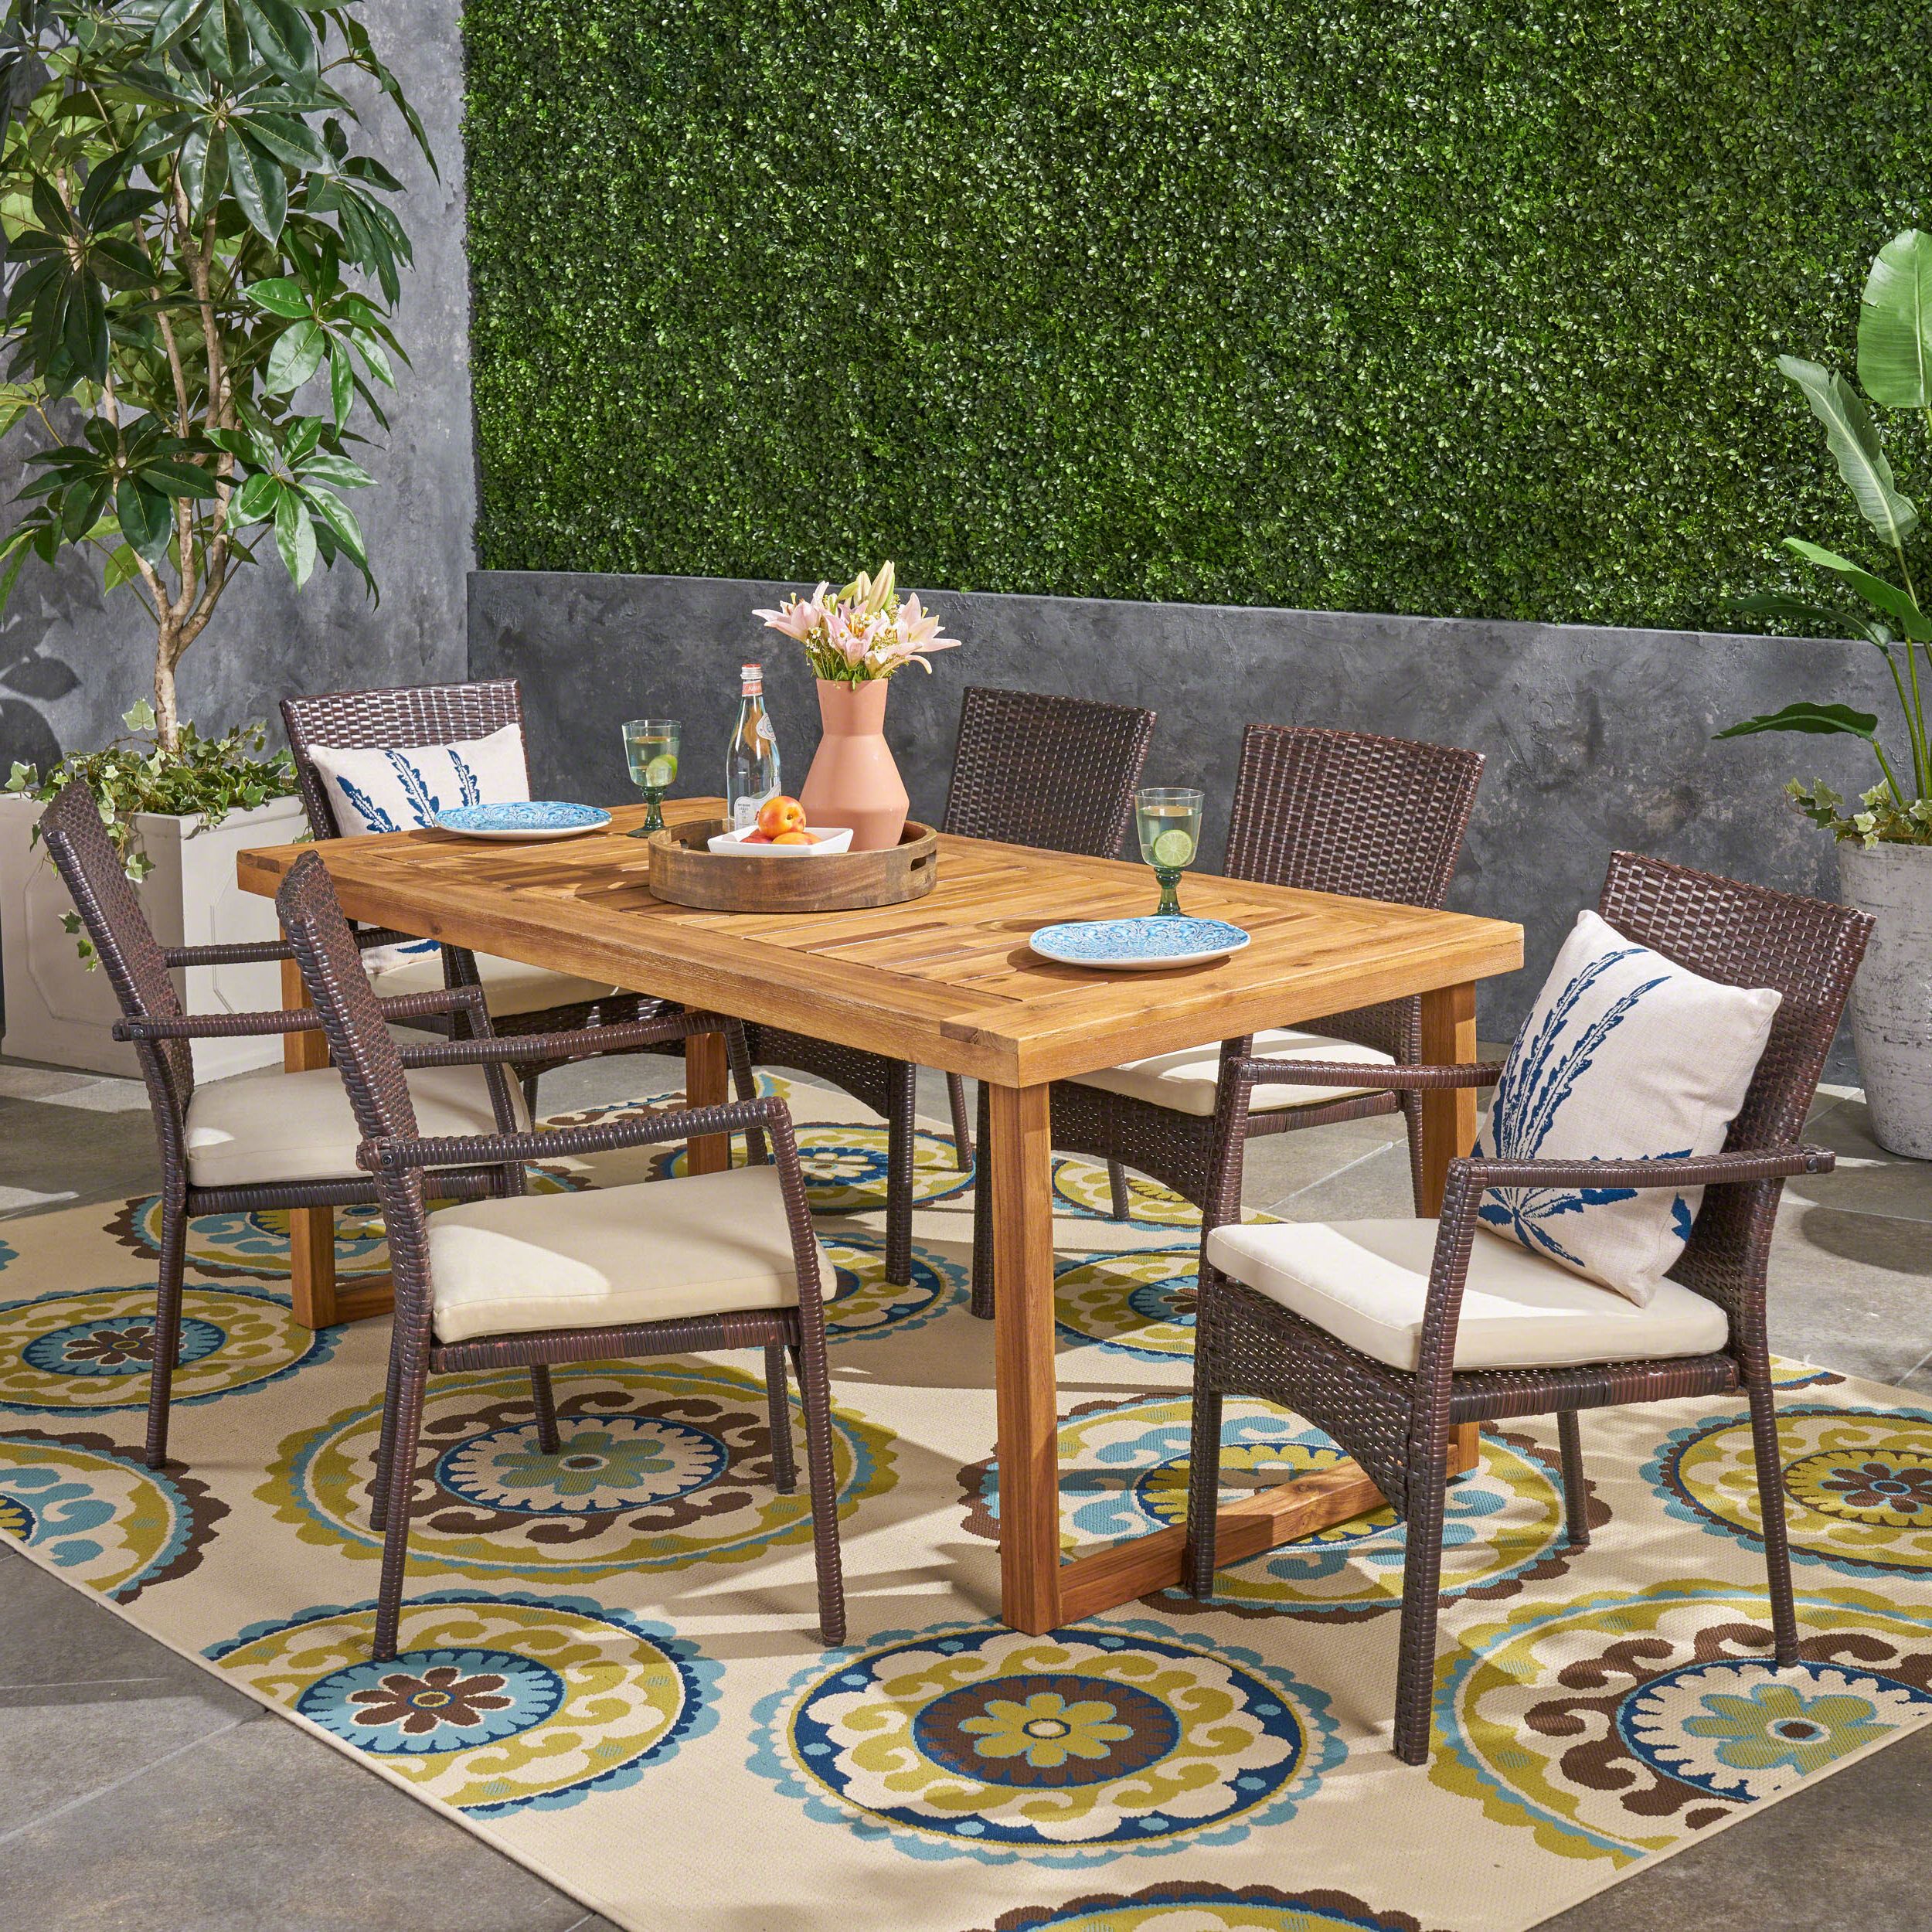 Most Recent Lily Outdoor 7 Piece Acacia Wood Dining Set With Wicker Chairs And Throughout Natural Woven Outdoor Chairs Sets (View 1 of 15)